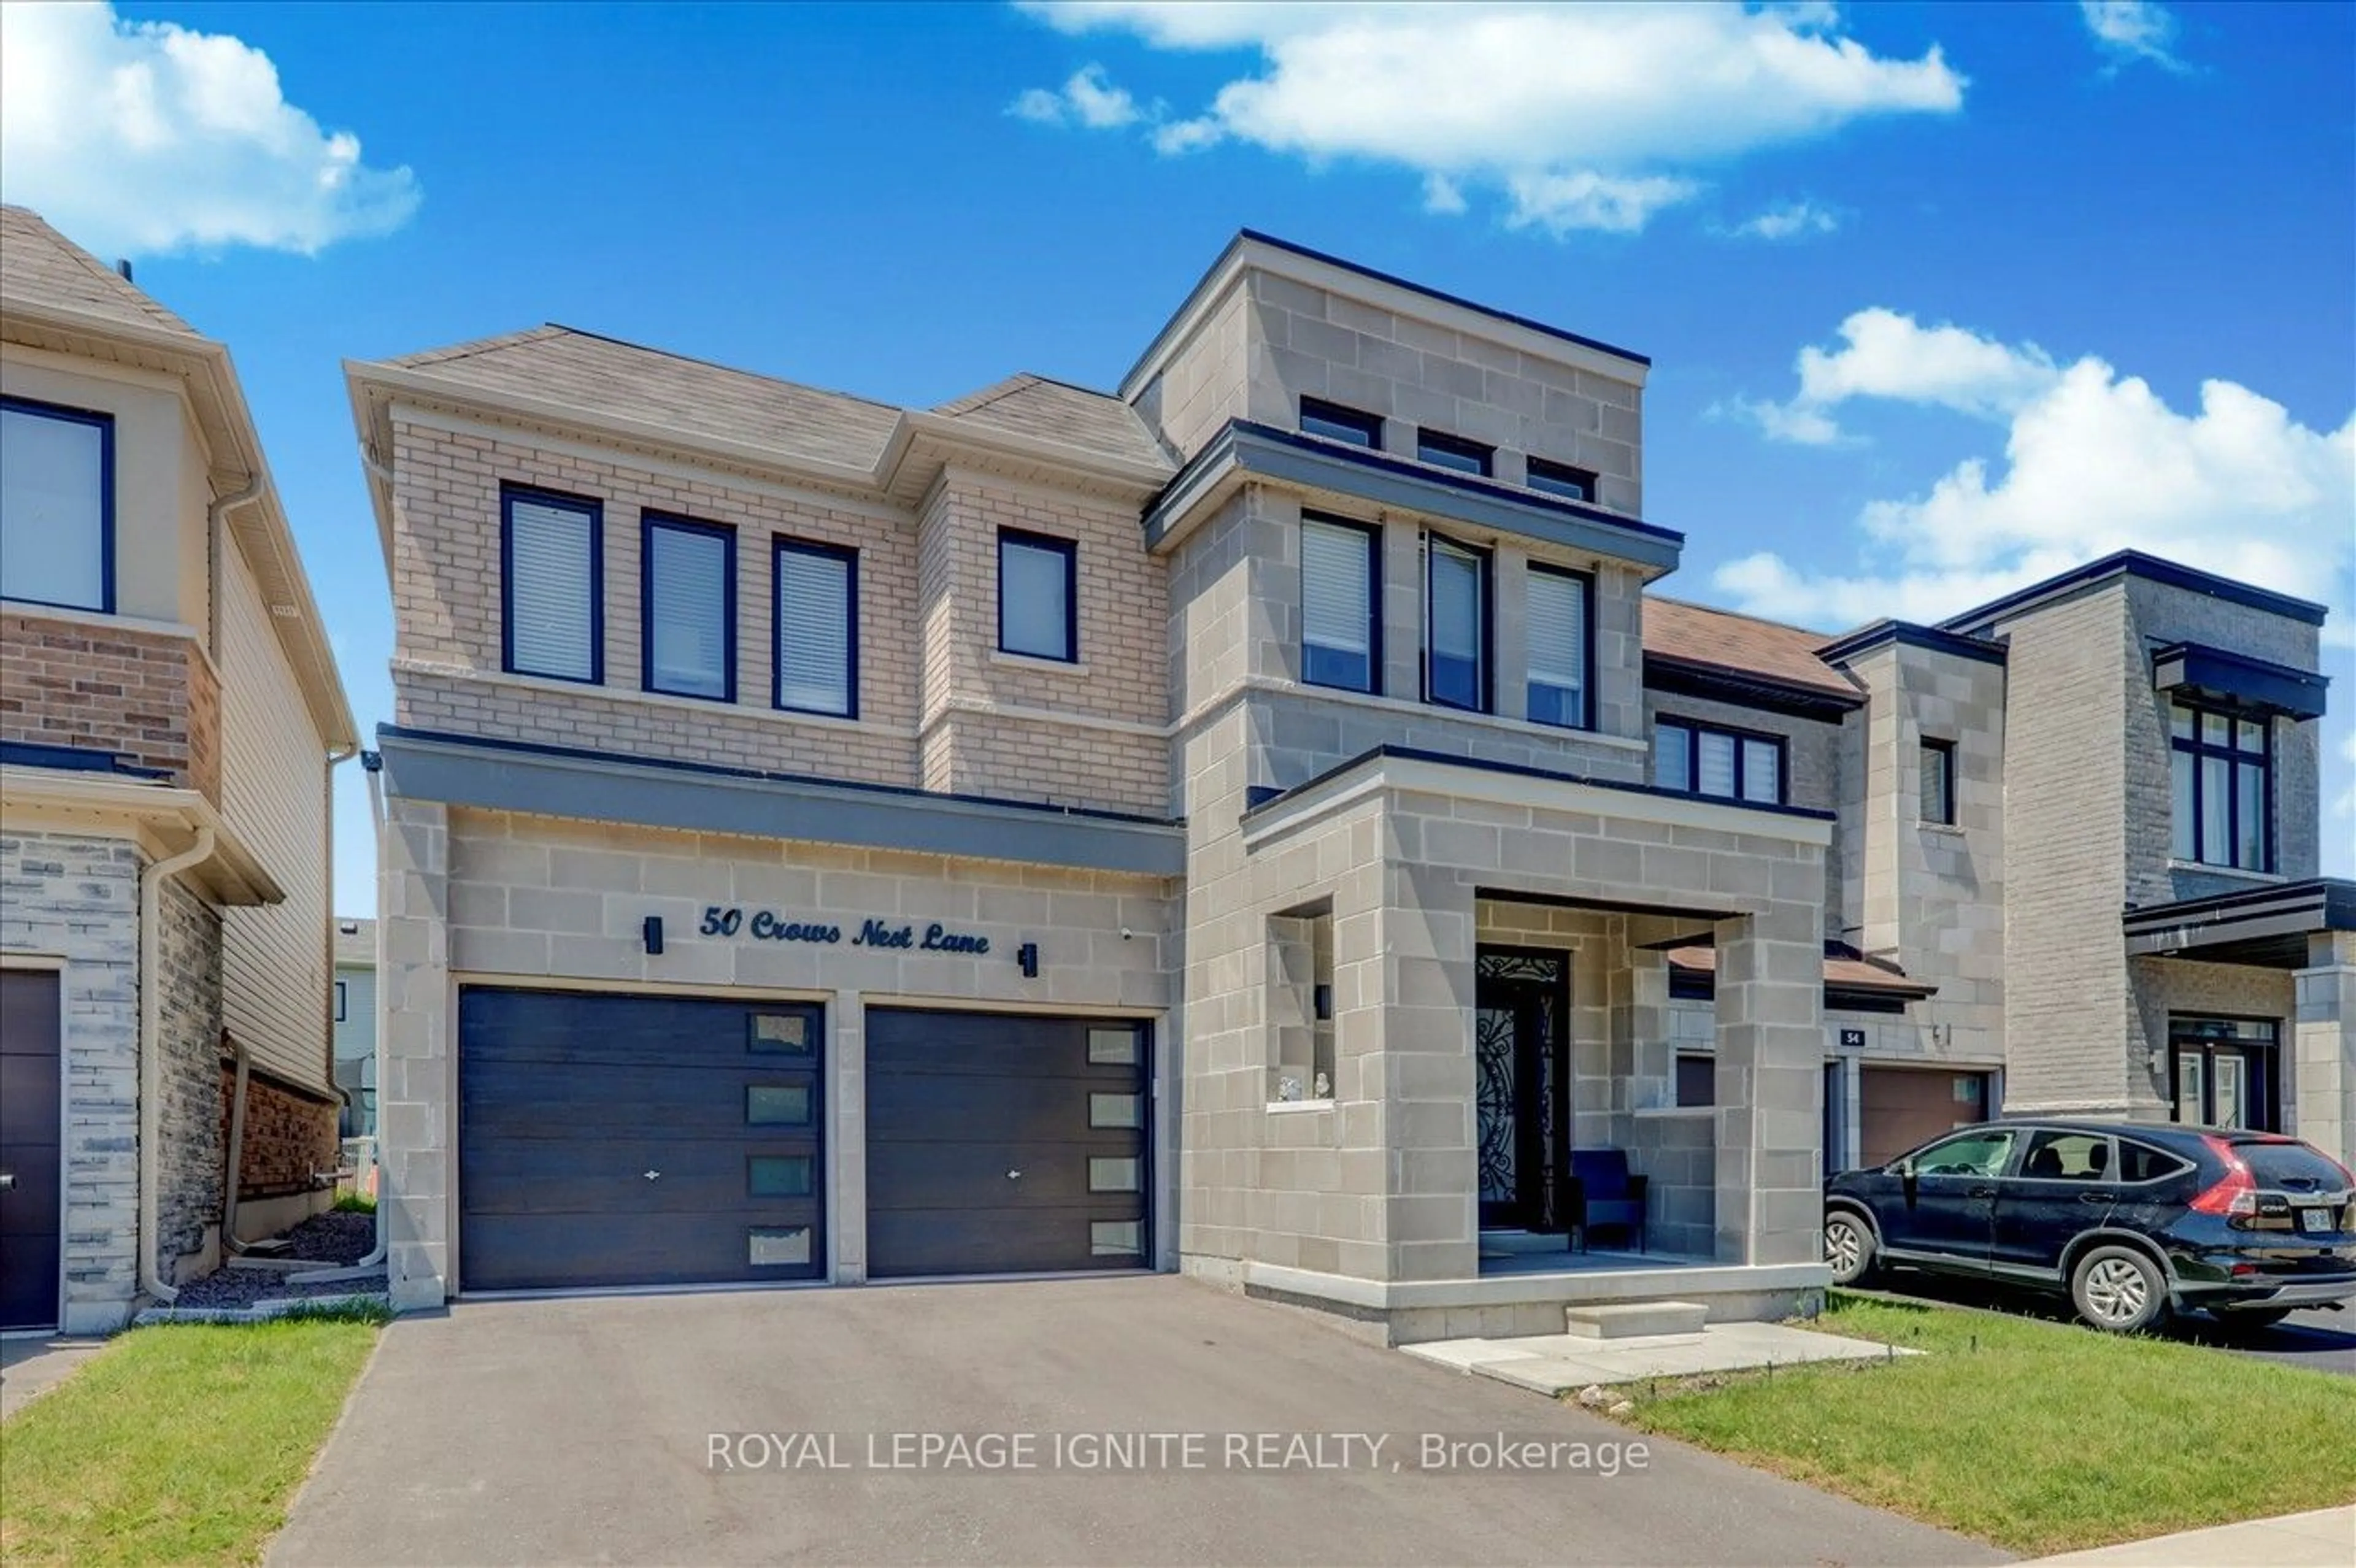 Frontside or backside of a home for 50 Crows Nest Lane, Clarington Ontario L1C 4A7